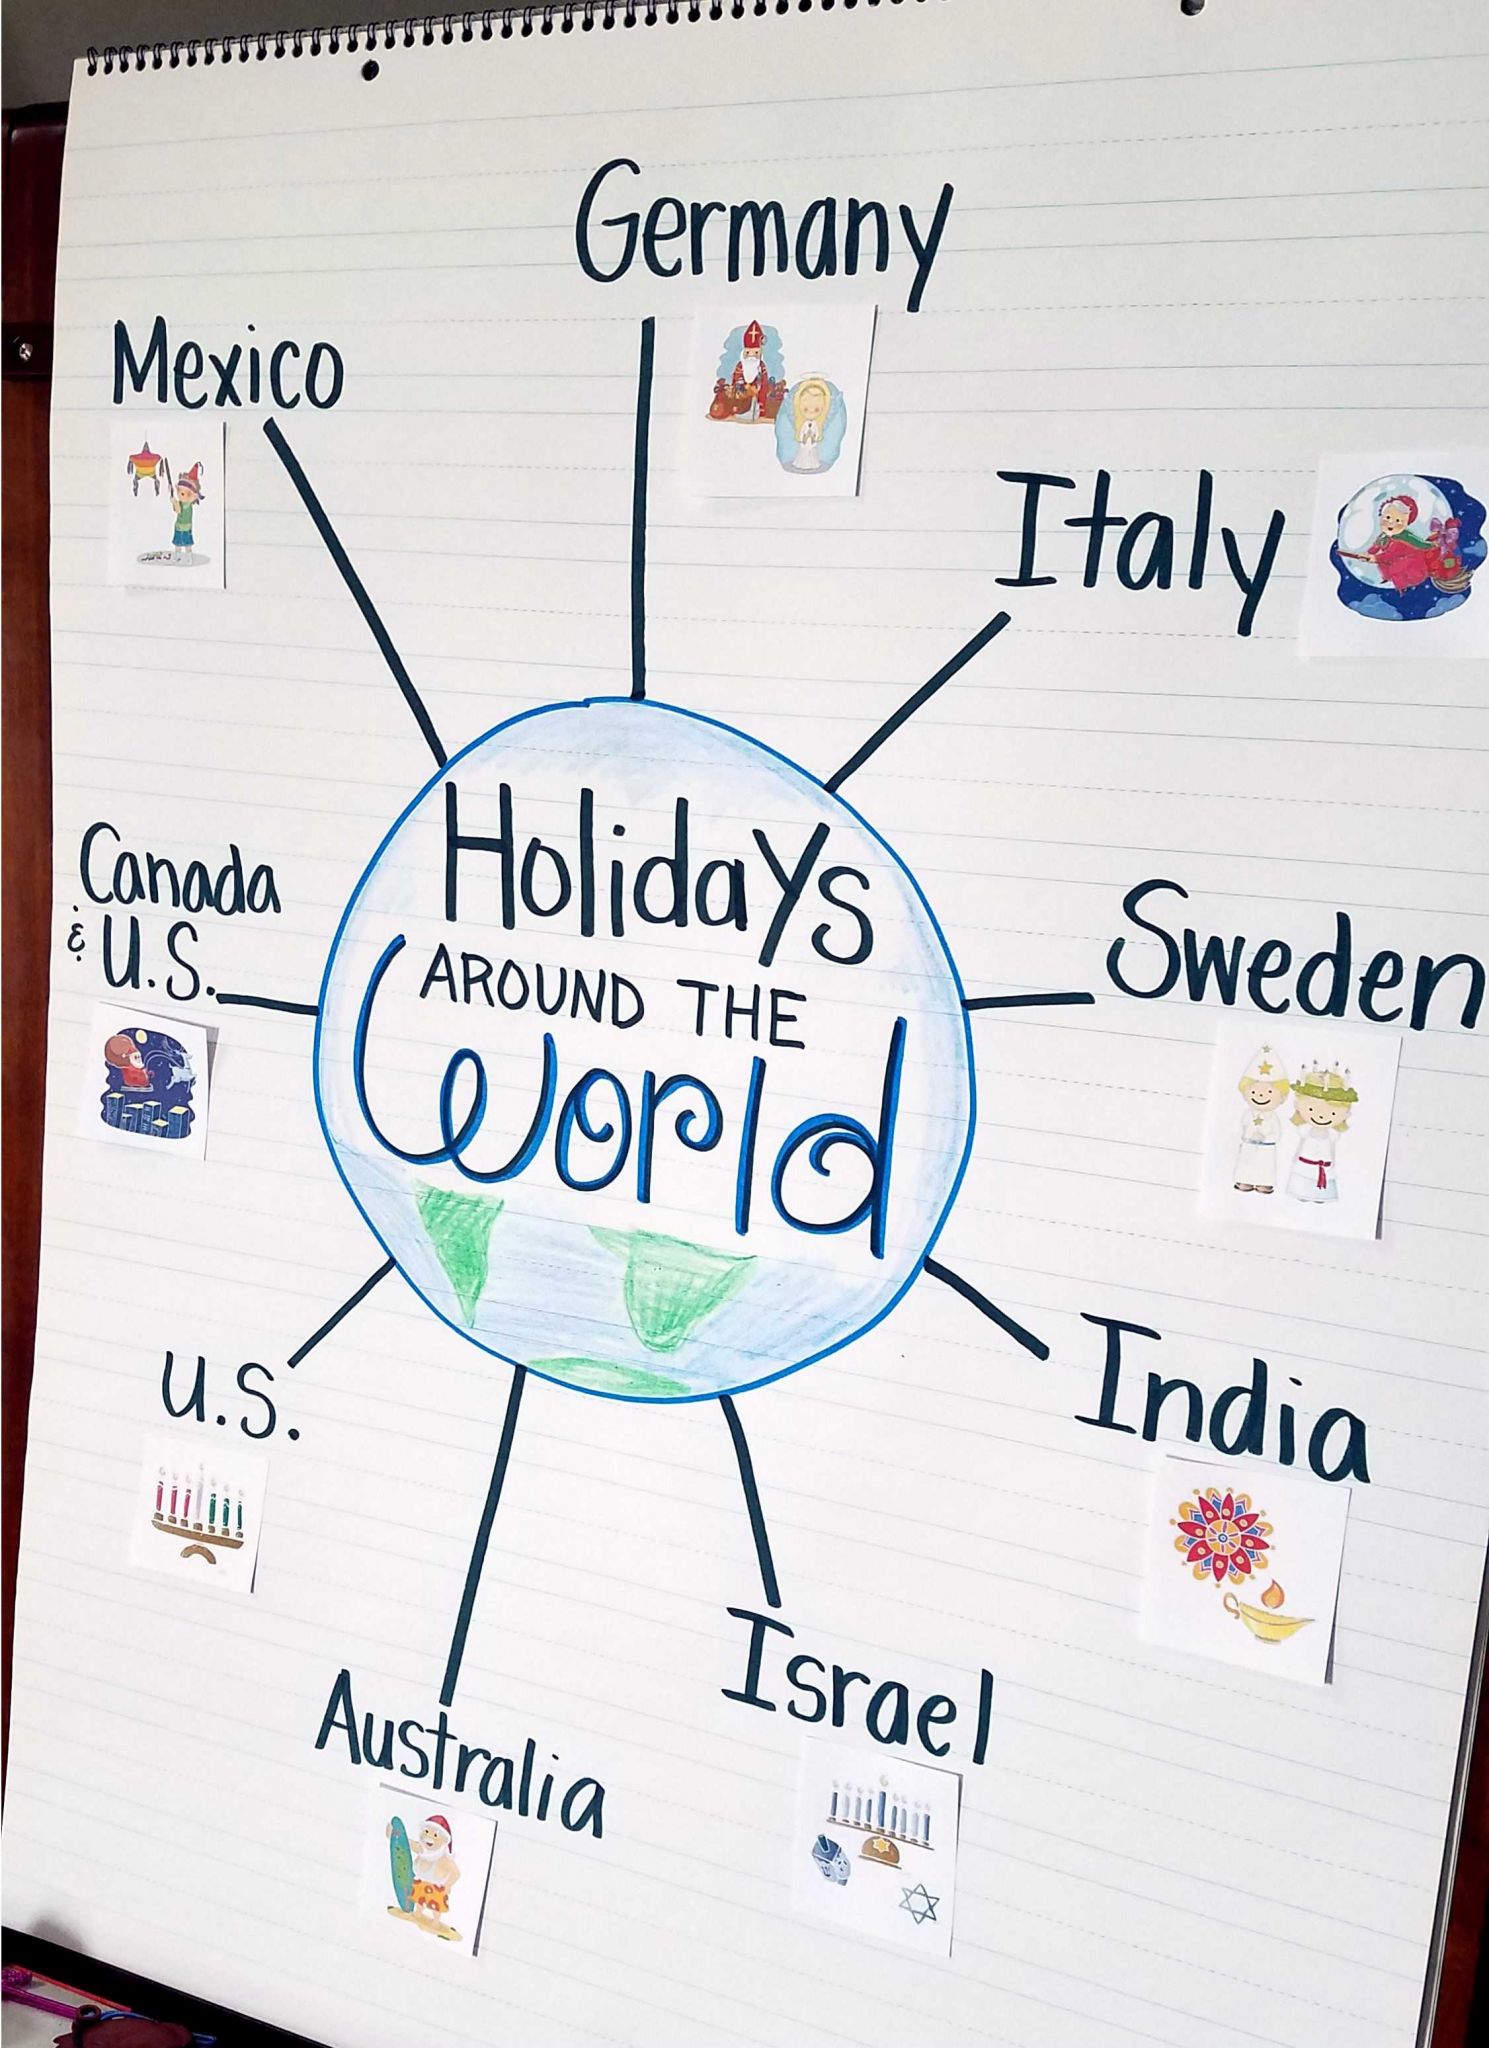 Christmas Worksheets for Kids as Well as Teaching Holidays Around the World In Kindergarten